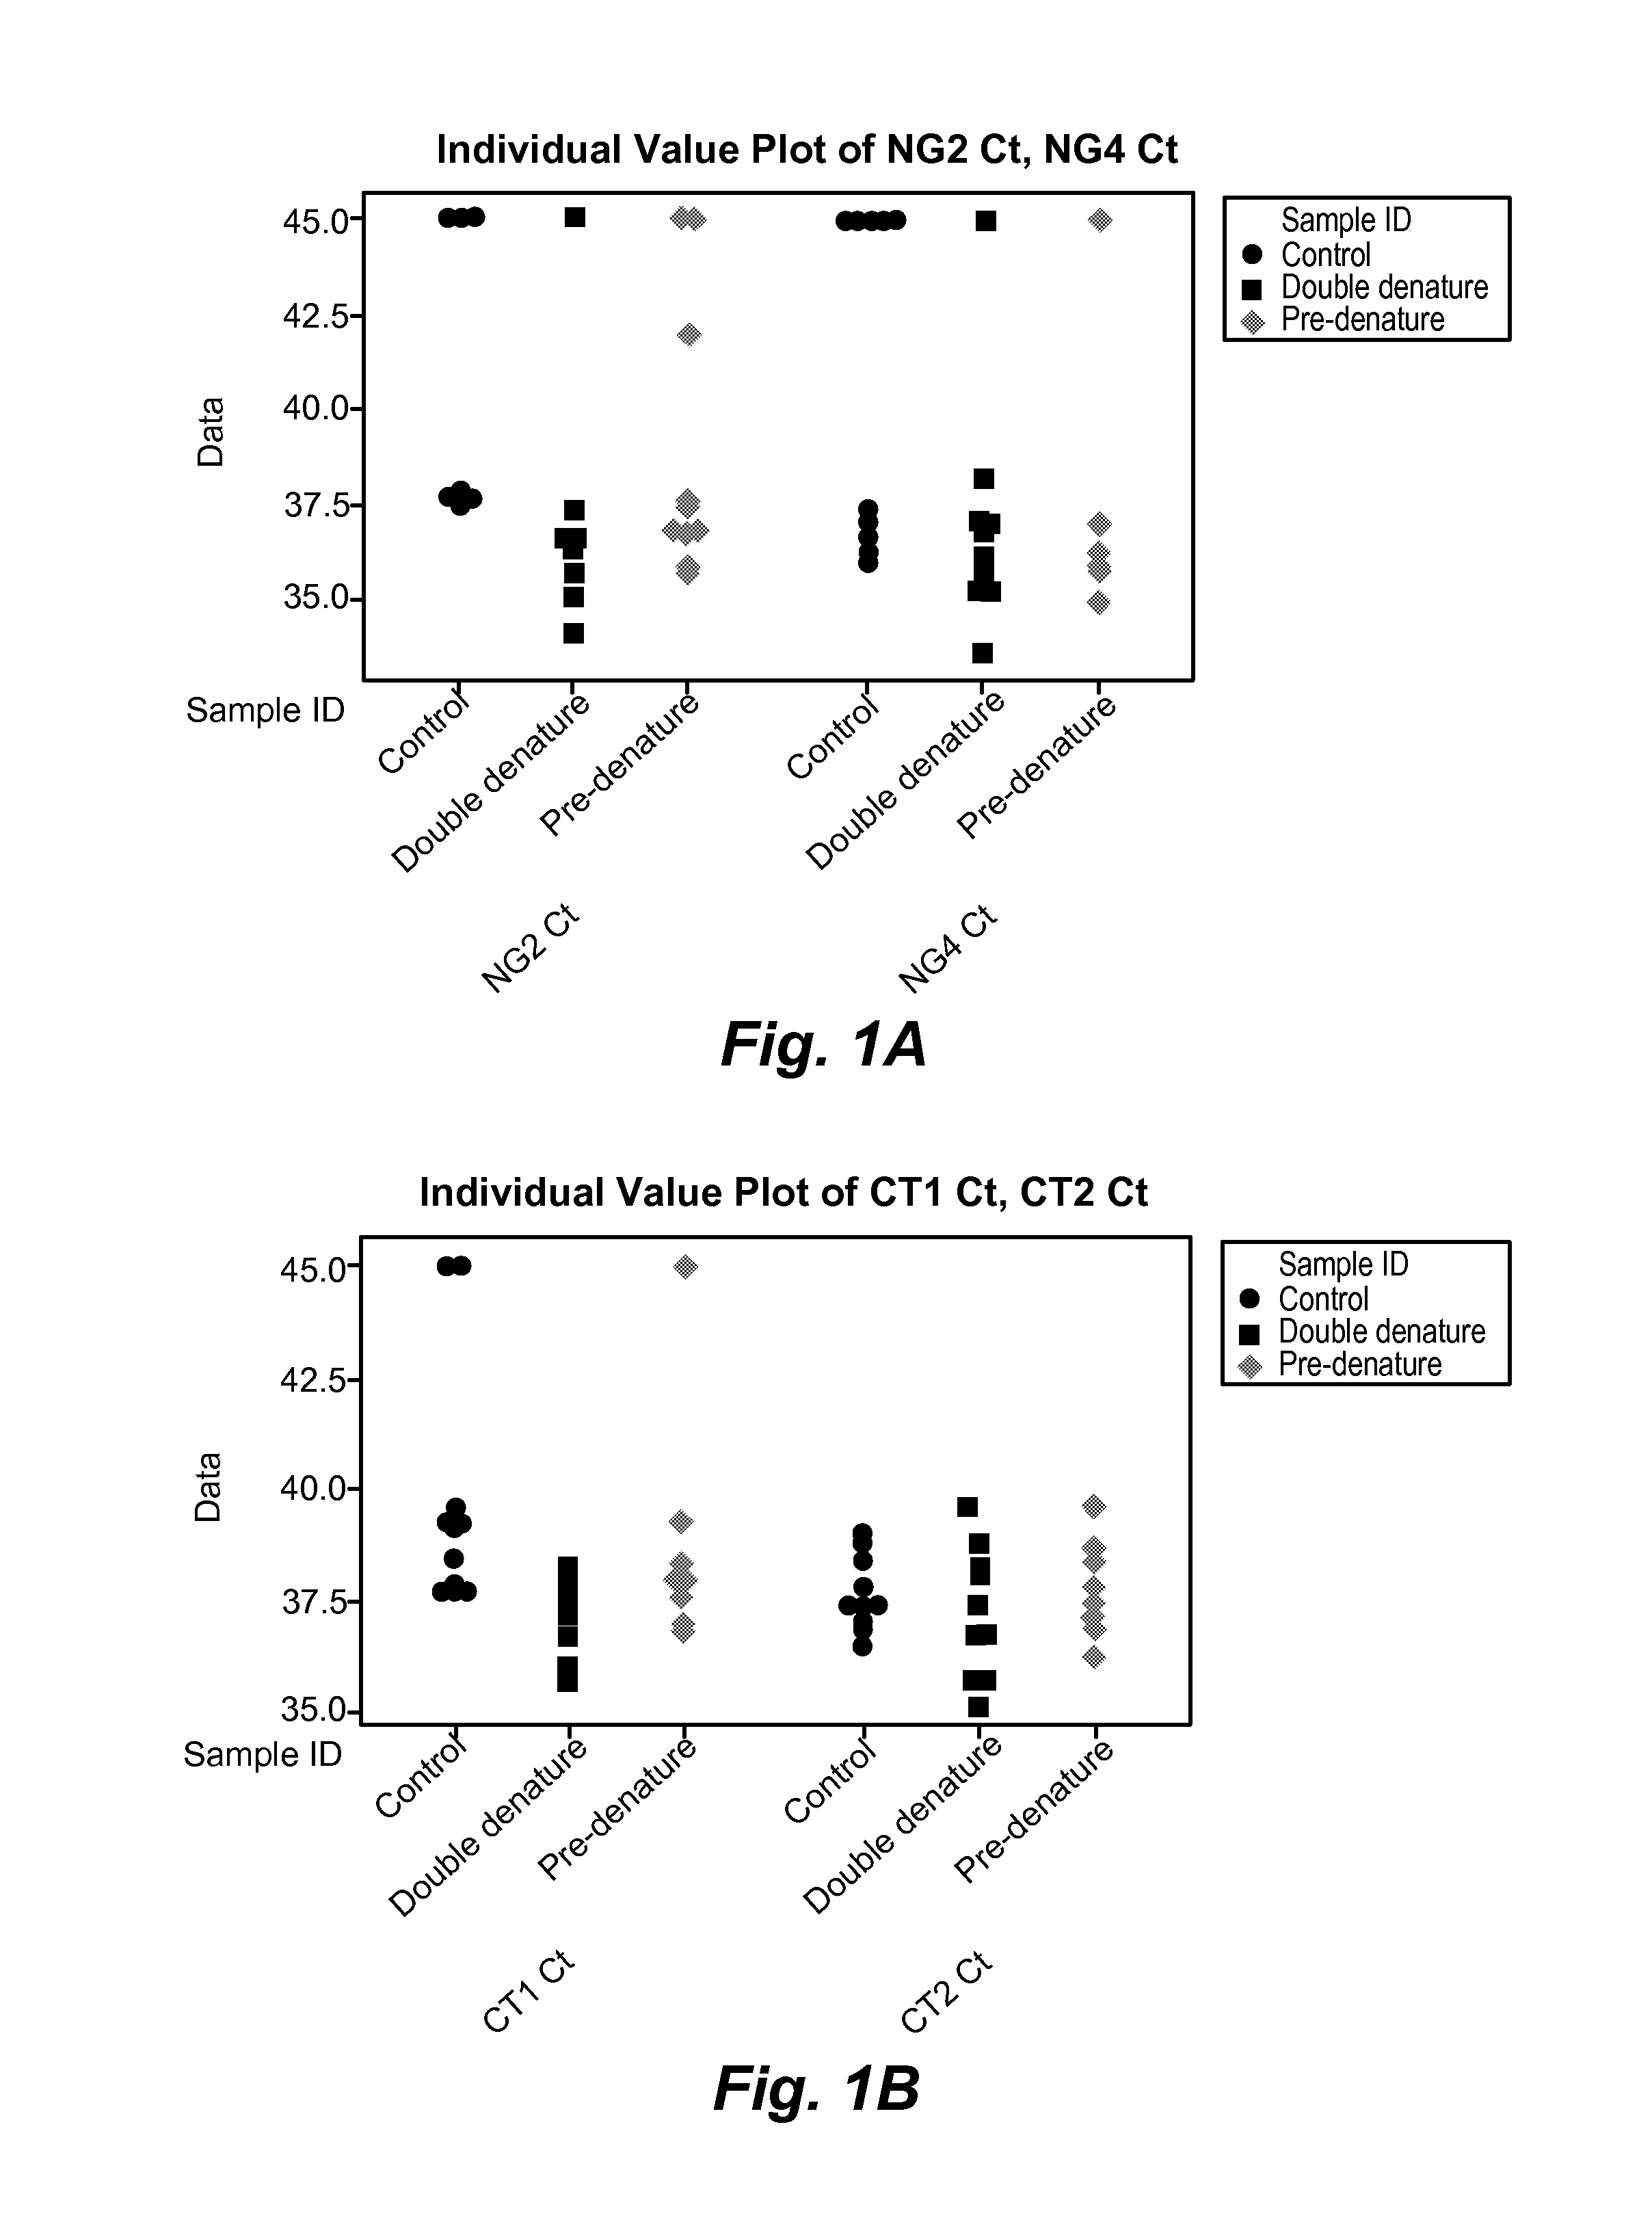 Methods of detecting chlamydia and gonorrhea and of screening for infection/inflammation based on genomic copy number